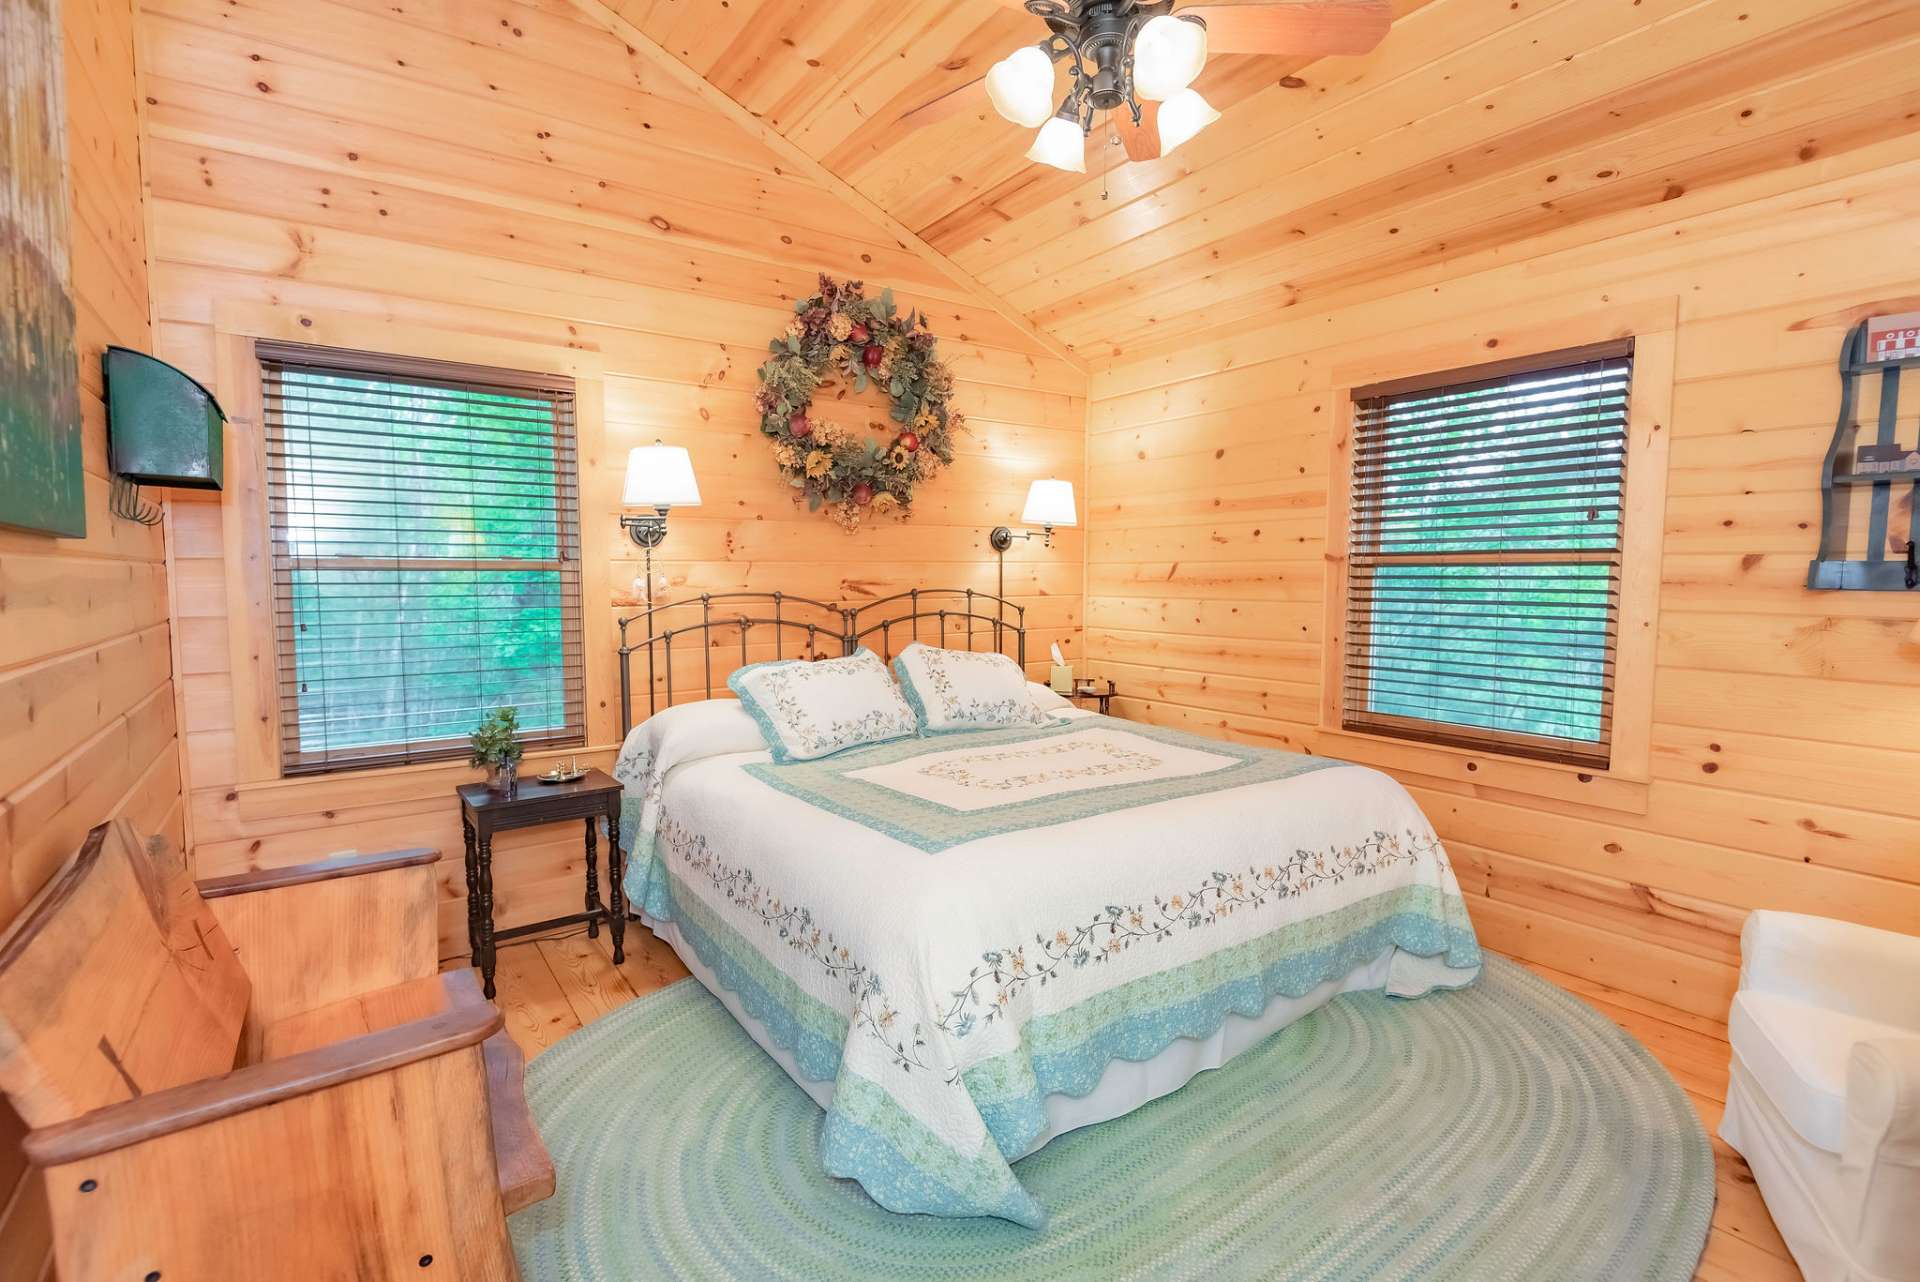 A guest bedroom, along with a full bath, is also located on the upper level.